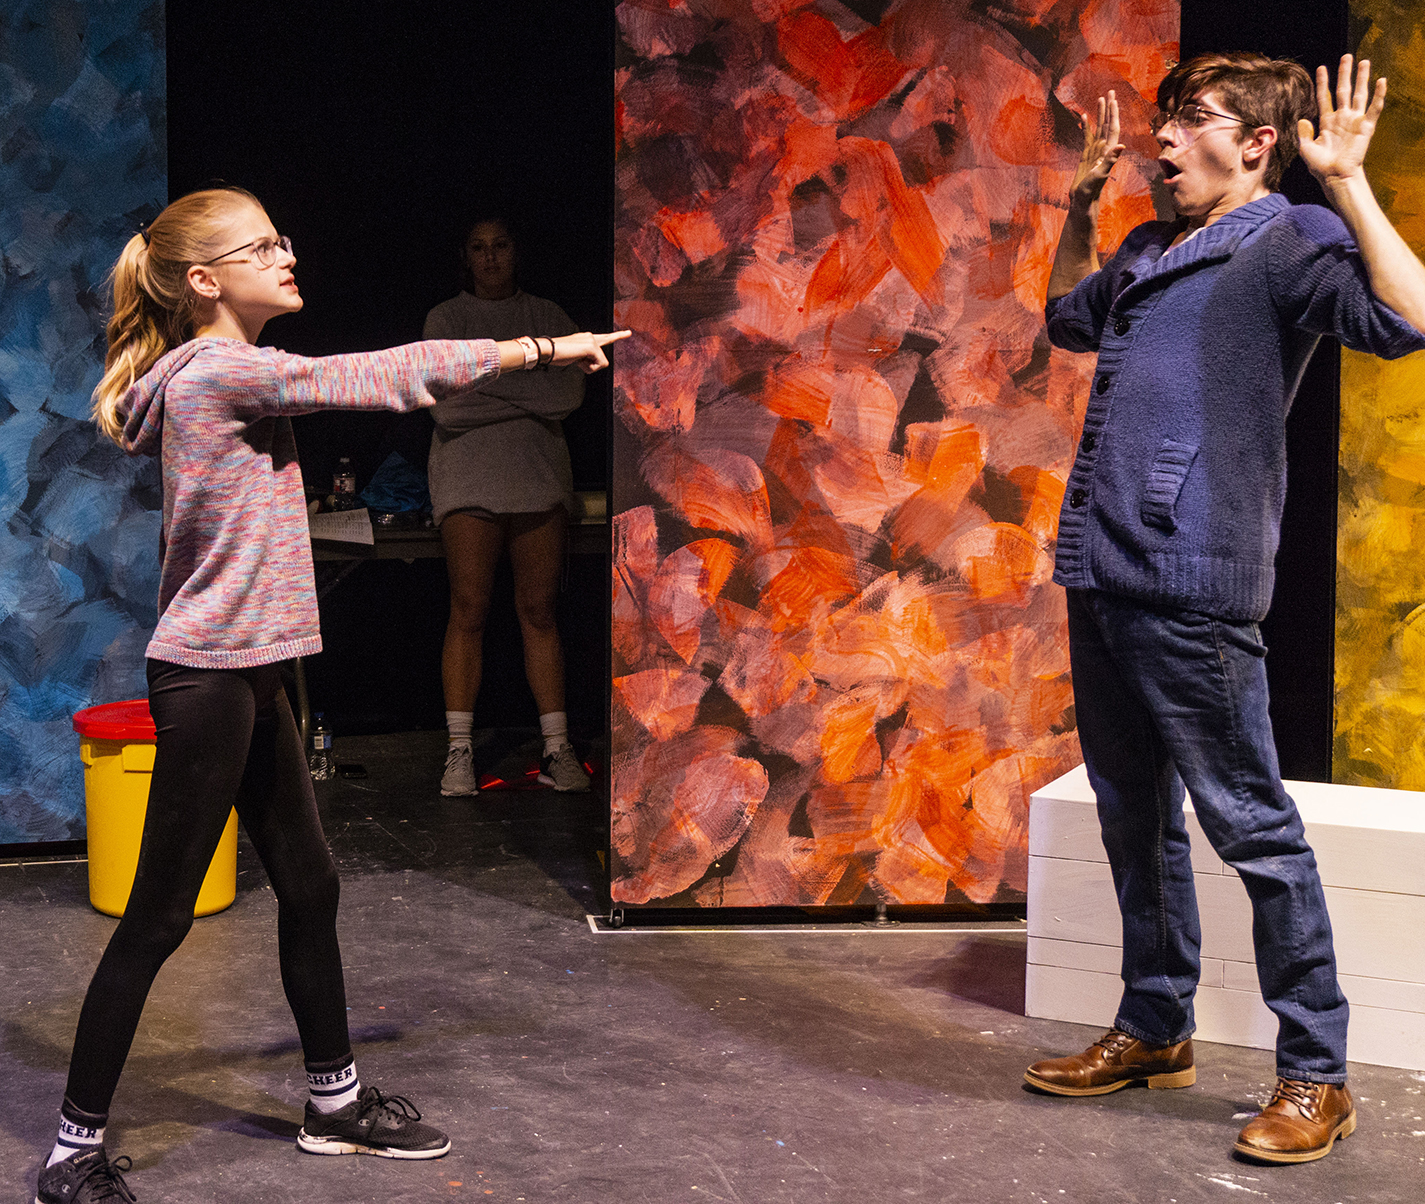 Westlake Academy 7th grader Megan Flight, who plays Benjamin, playfully interacts with NW student Lane Norris, who plays Benjamin’s father, in The Yellow Boat which comes to stage Nov. 14-18 in Theatre Northwest.